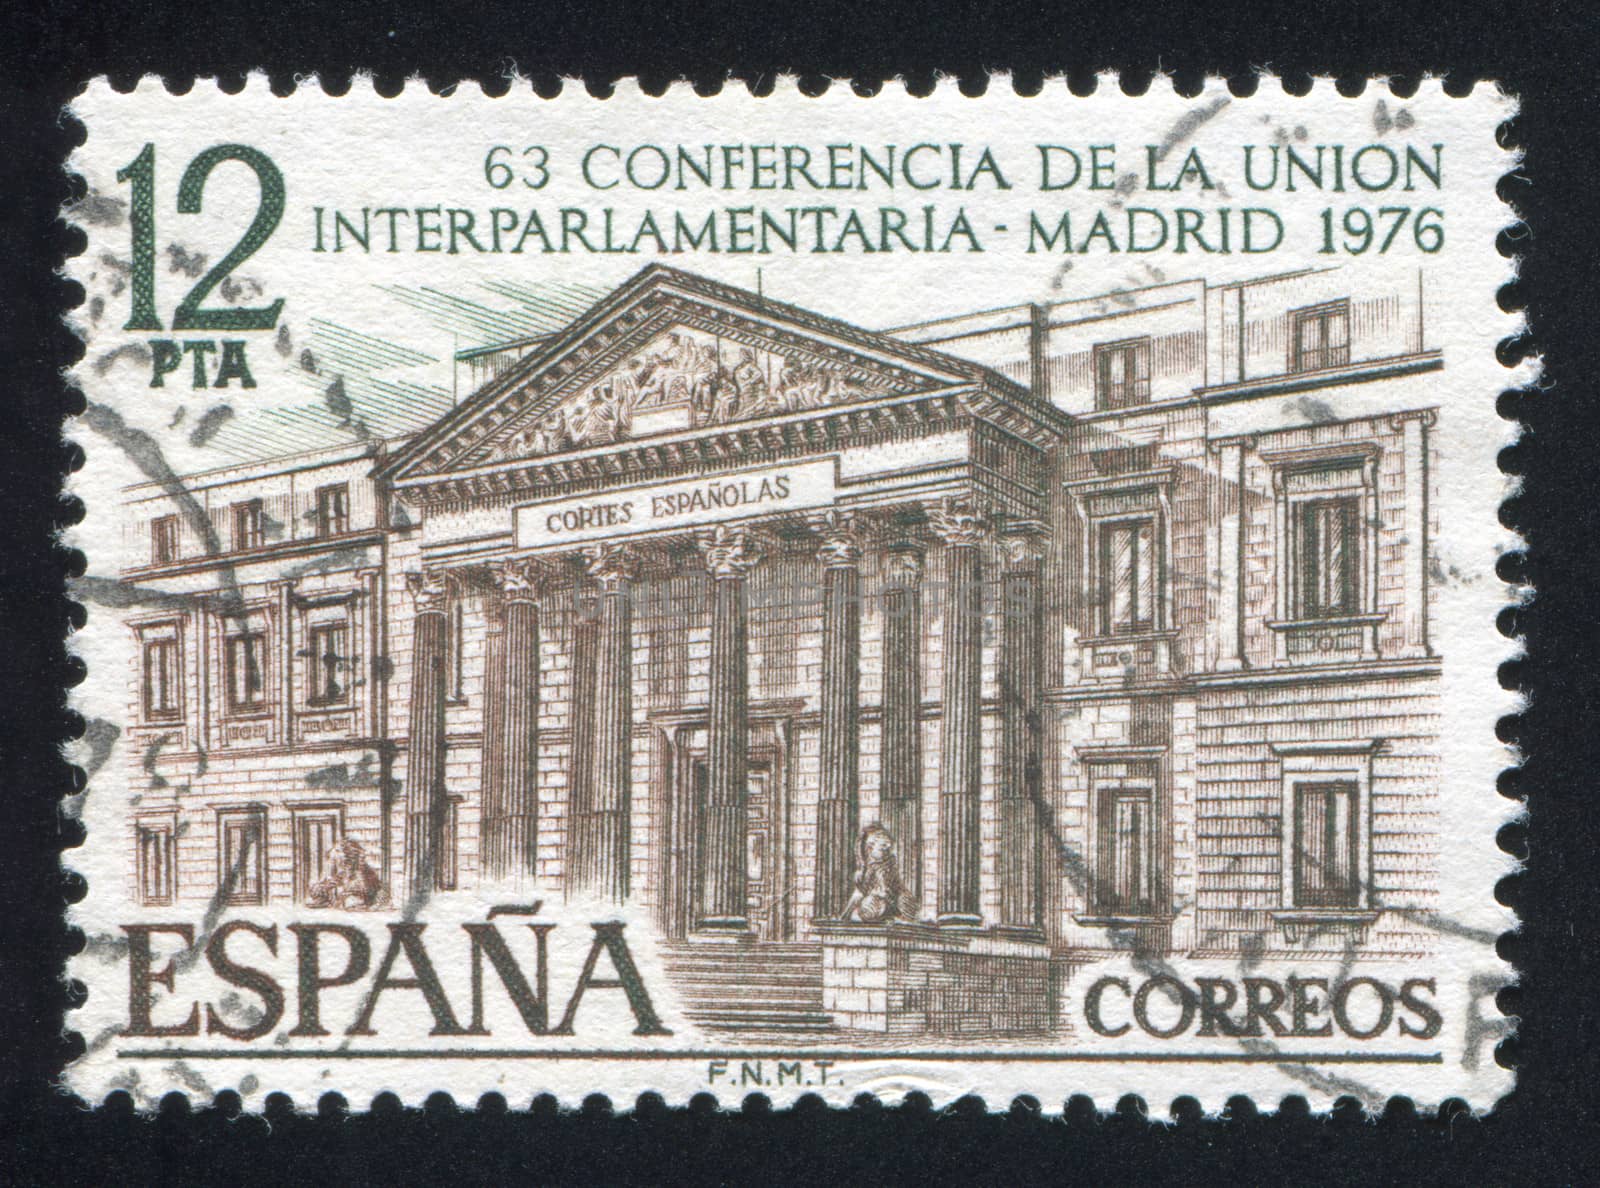 Parliament in Madrid by rook